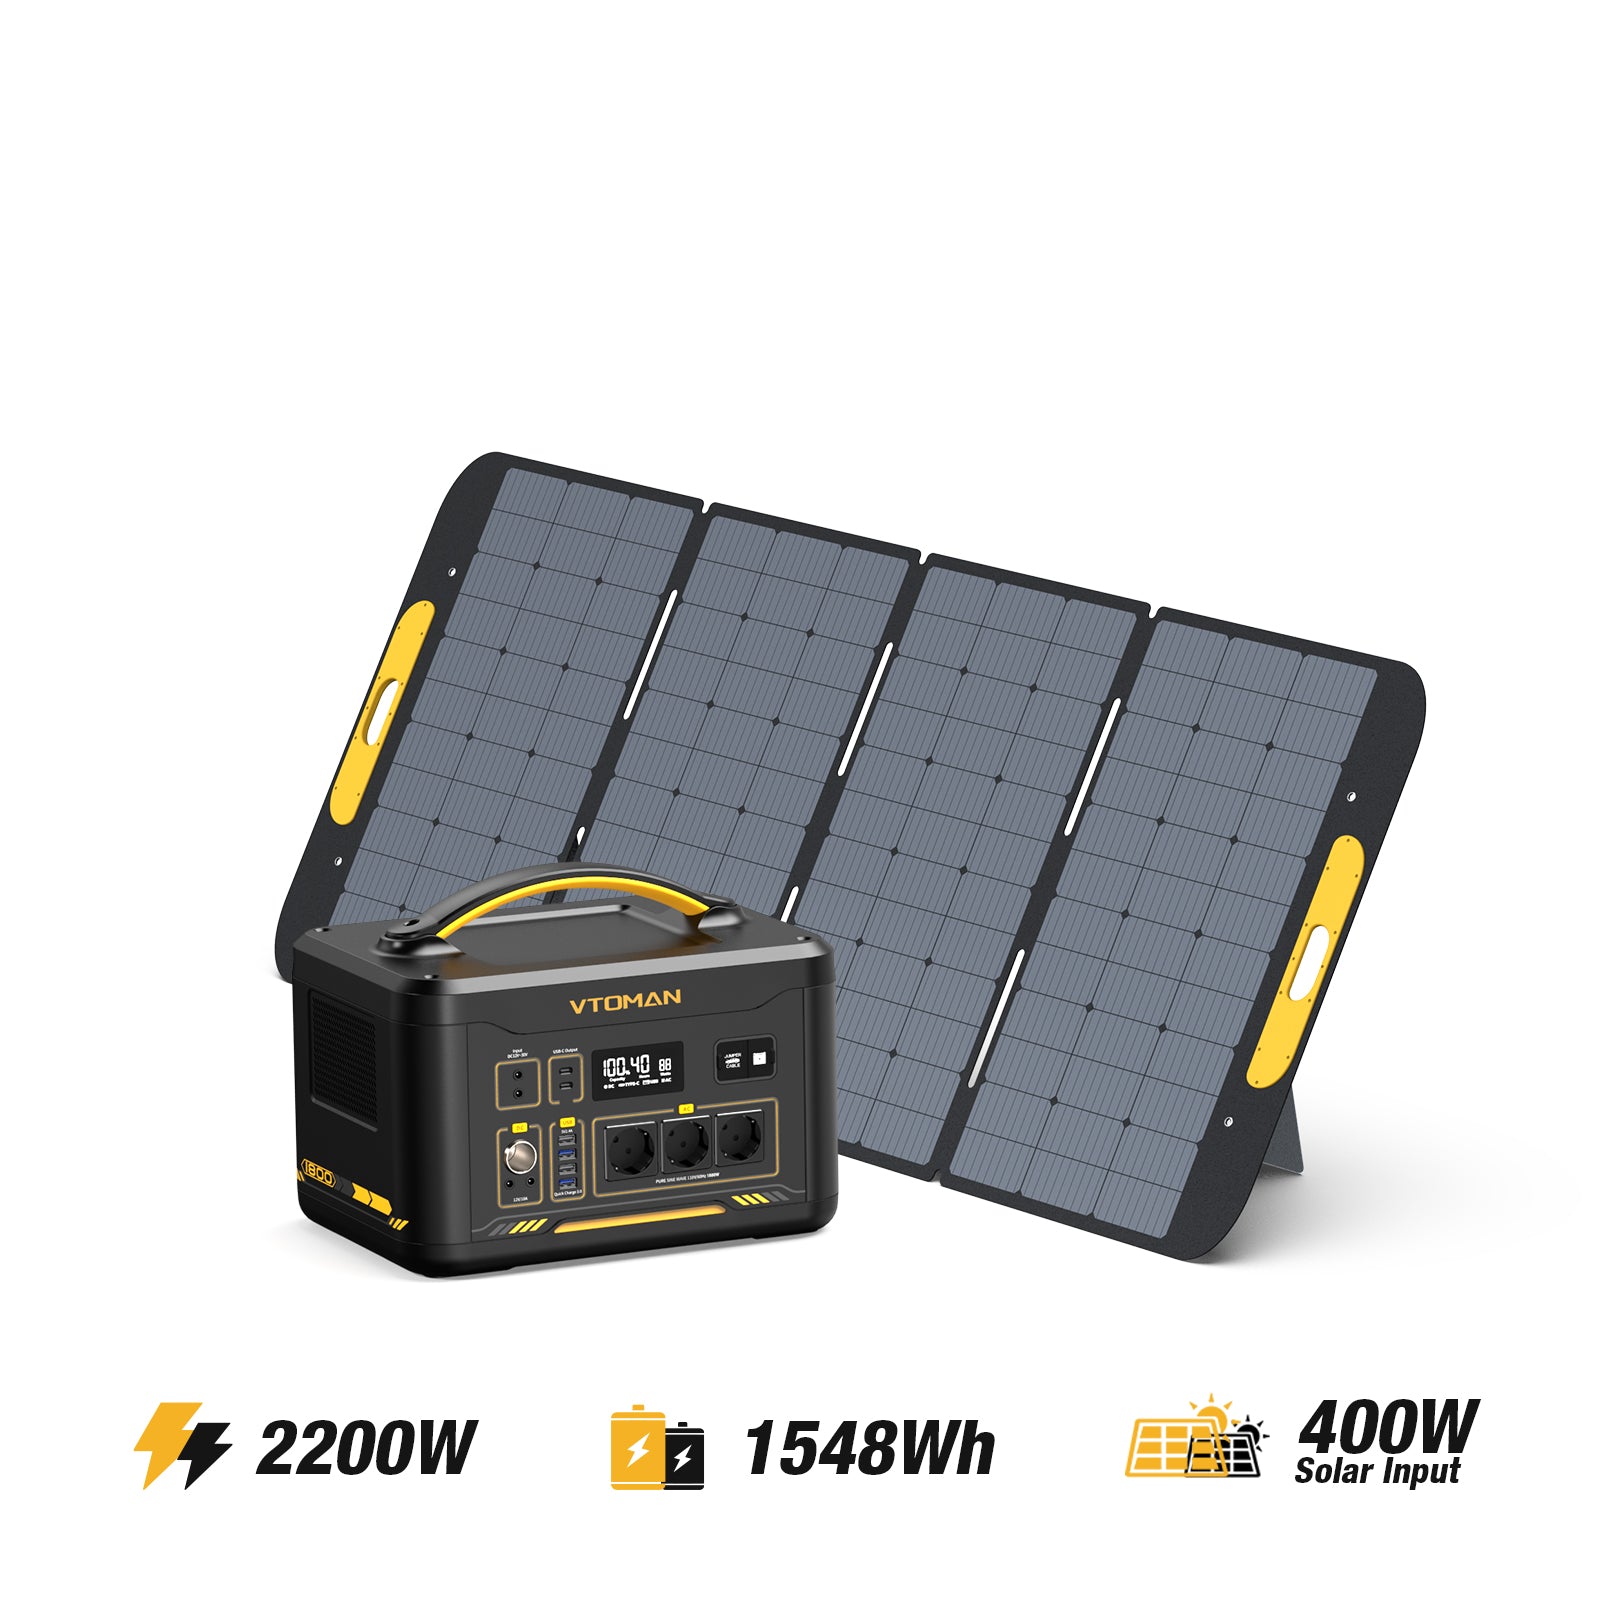 Jump 2200W/1548Wh  400W Solargenerator